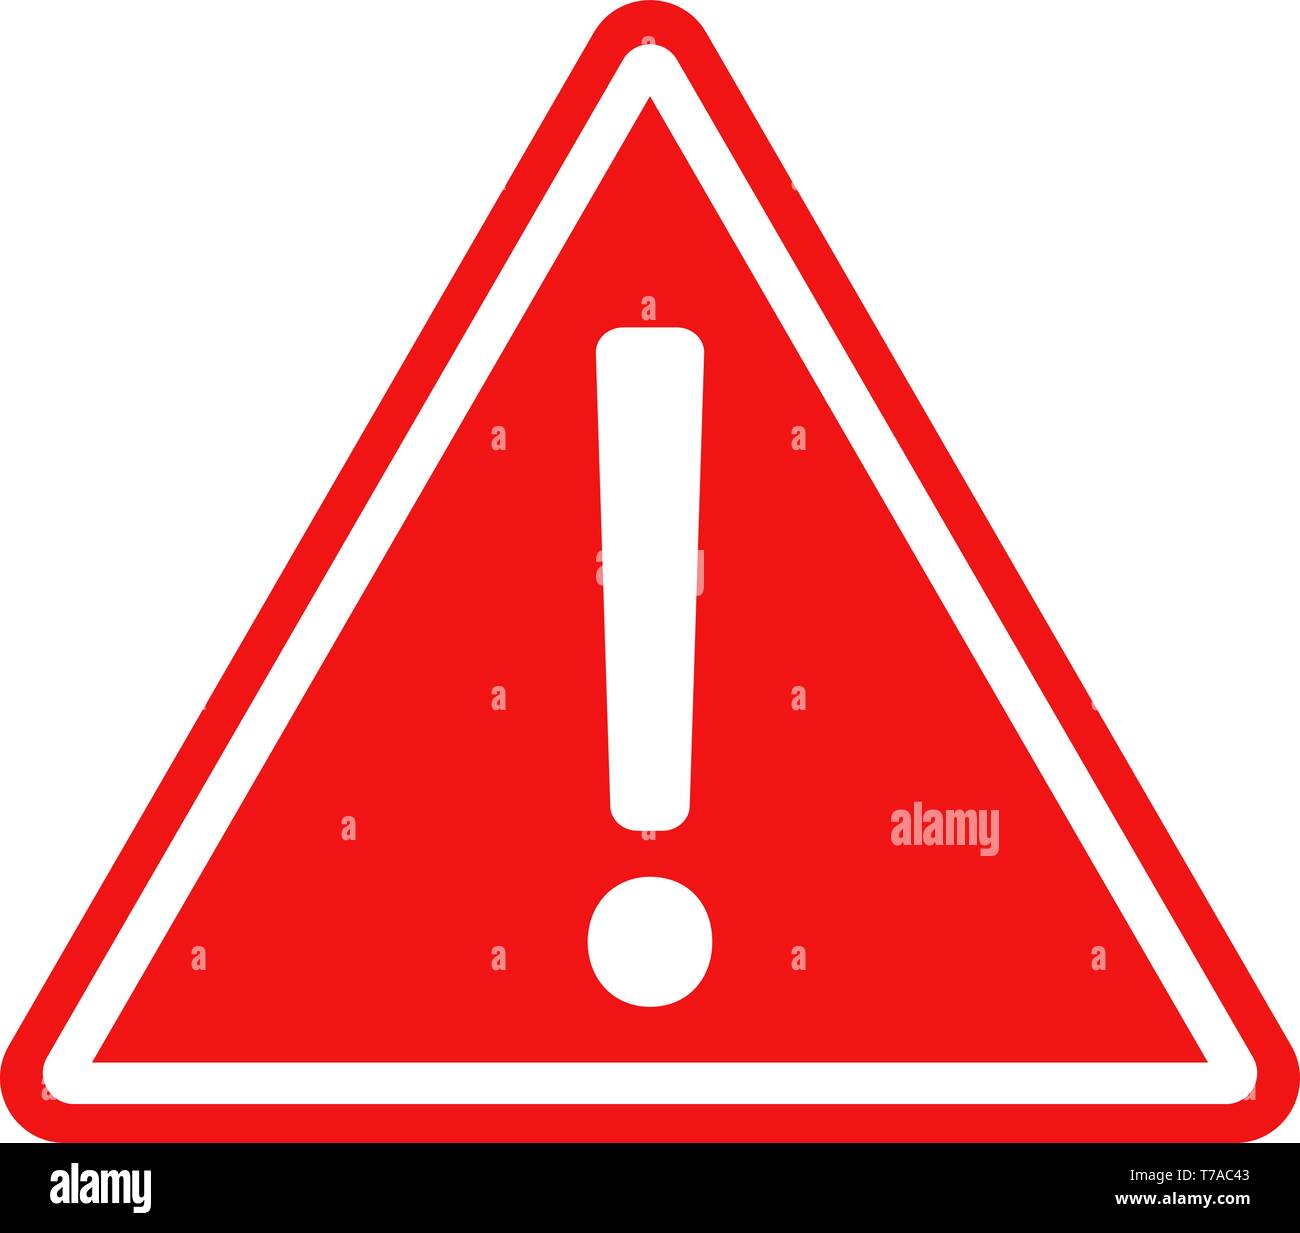 Red warning sign with white exclamation mark icon vector illustration Stock Vector